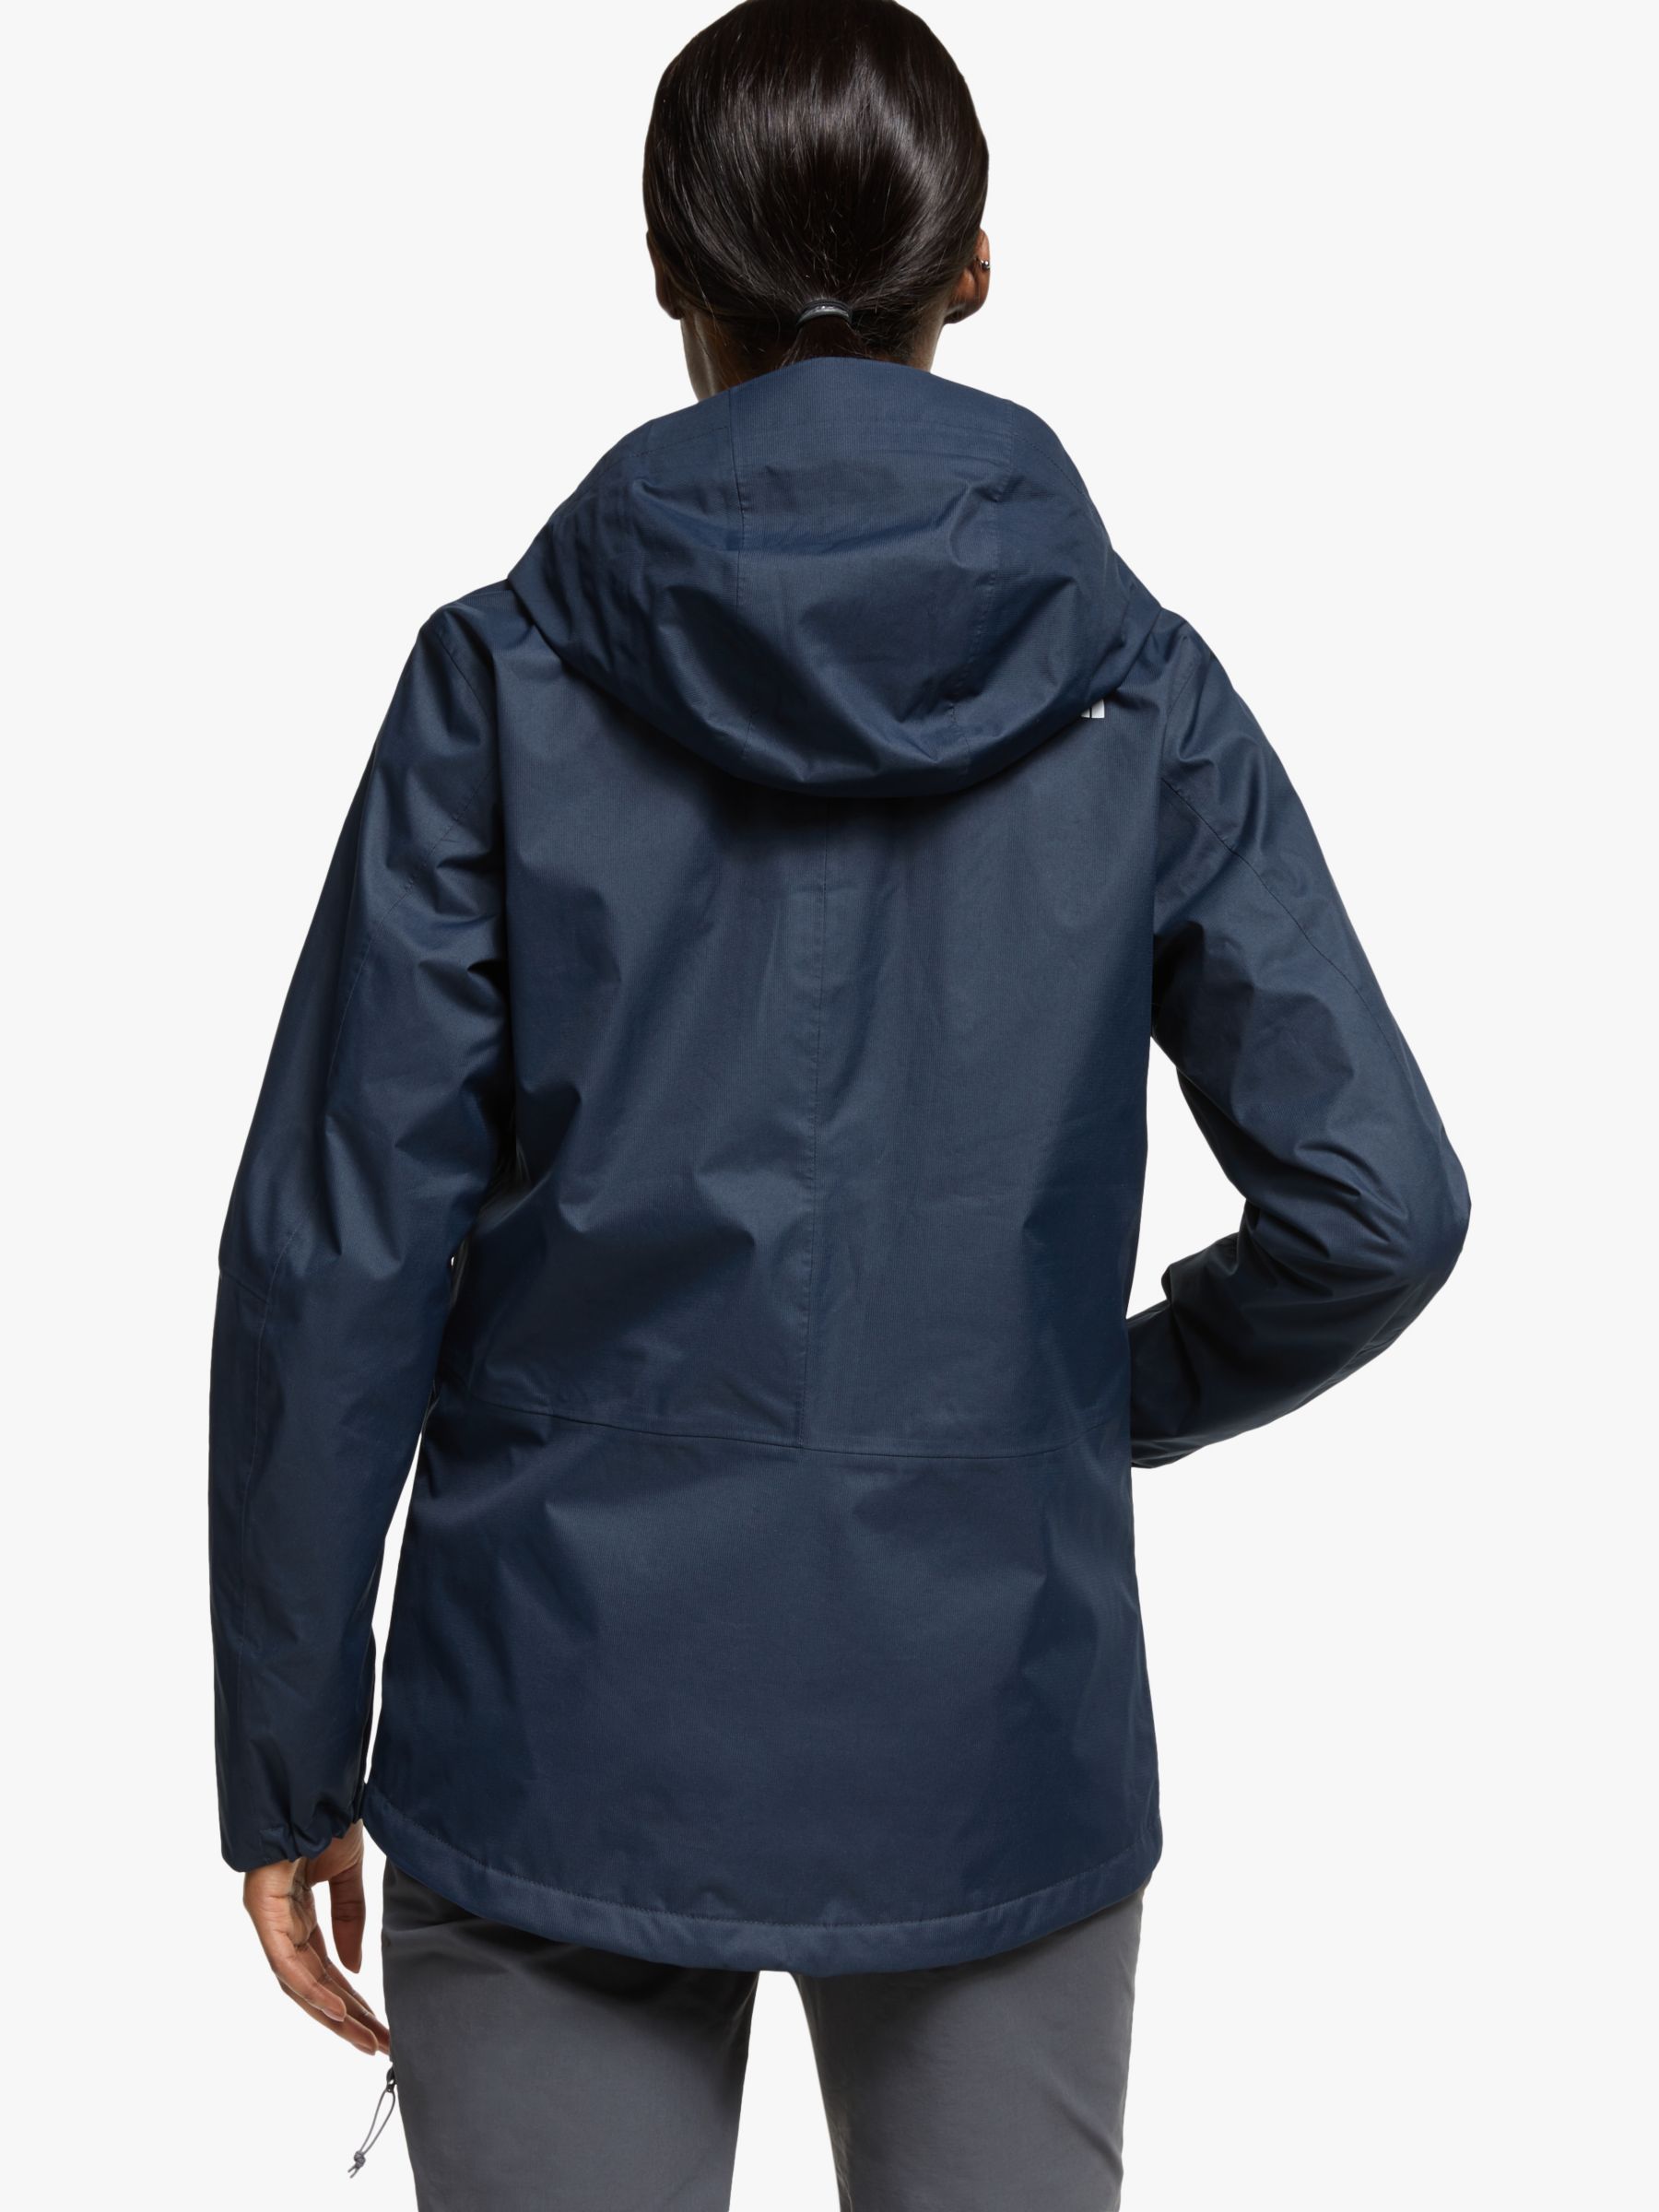 The North Face Quest 3-in-1 Women's Waterproof Jacket, Urban Navy/Windmill Blue at John Lewis 